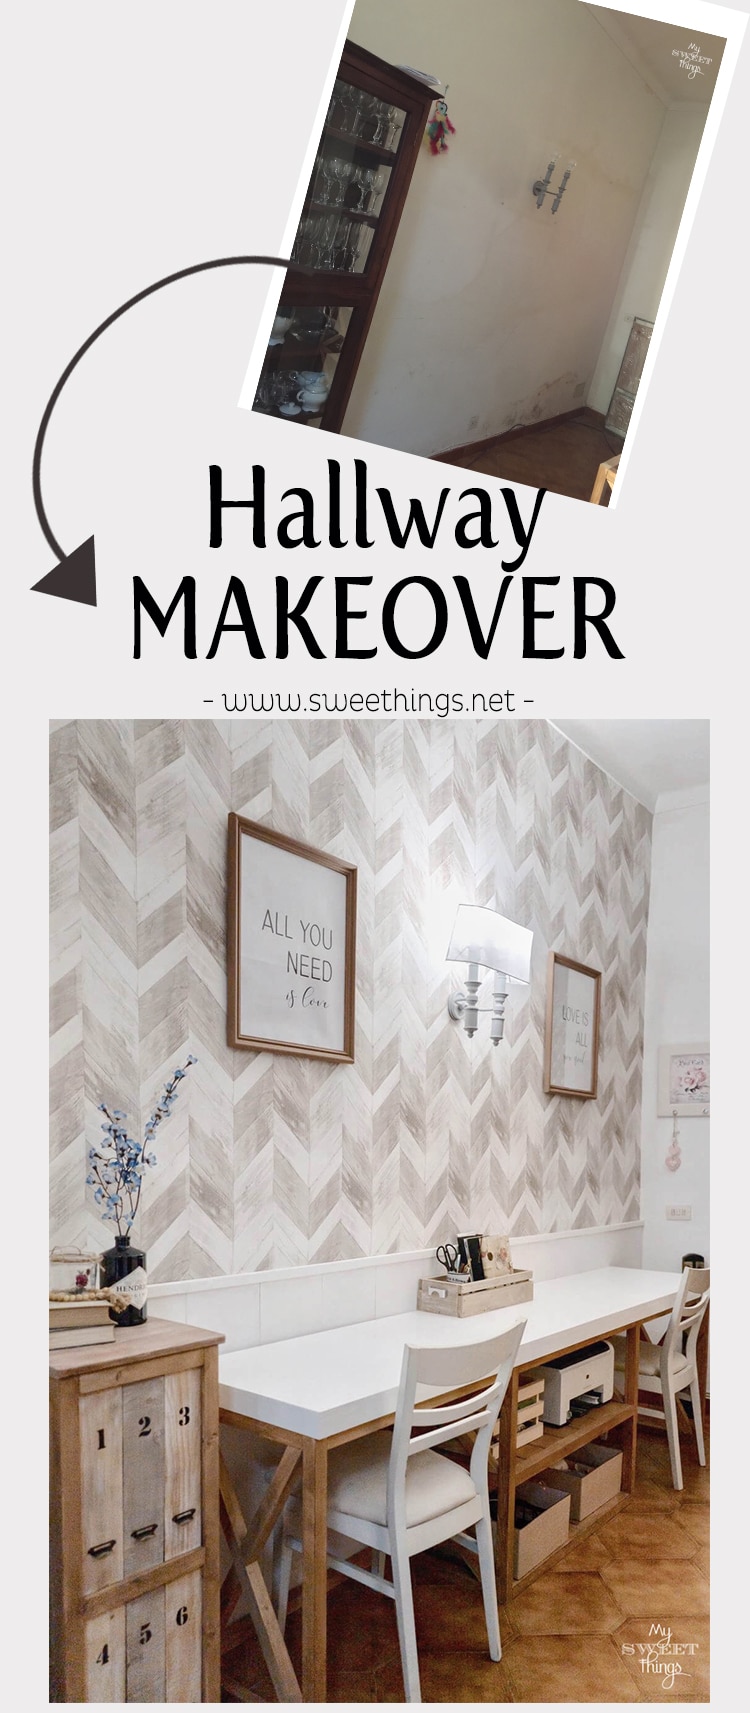 Hallway makeover on a budget · Via www.sweethings.net